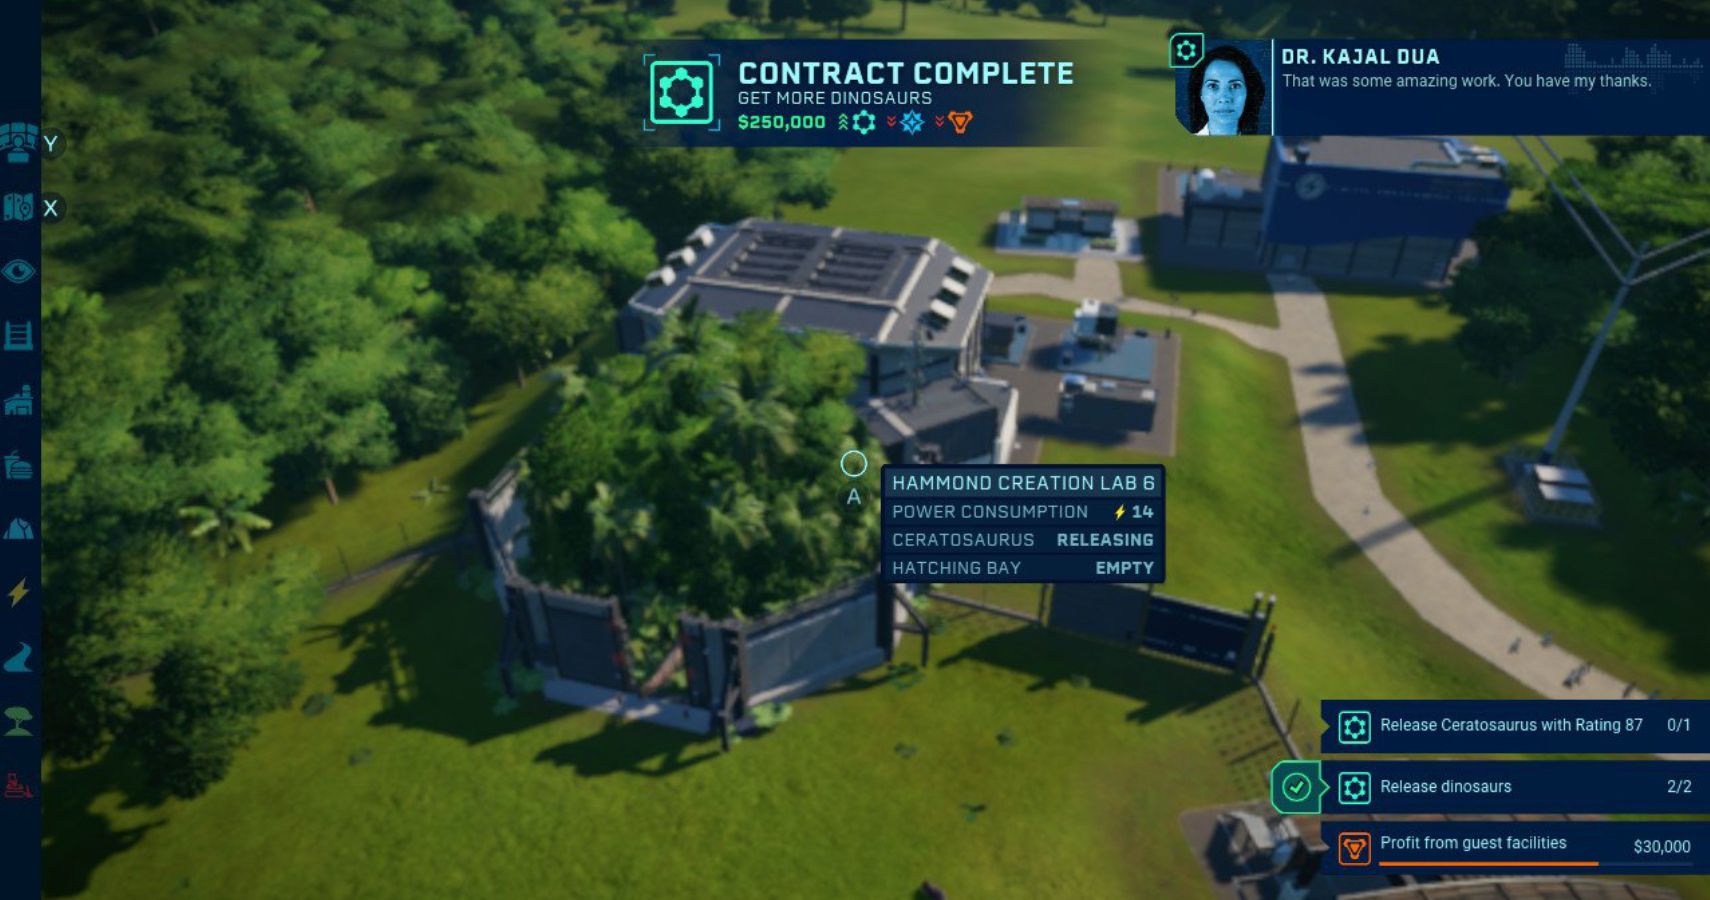 Completed contract screen next to Hammond Creation Lab.